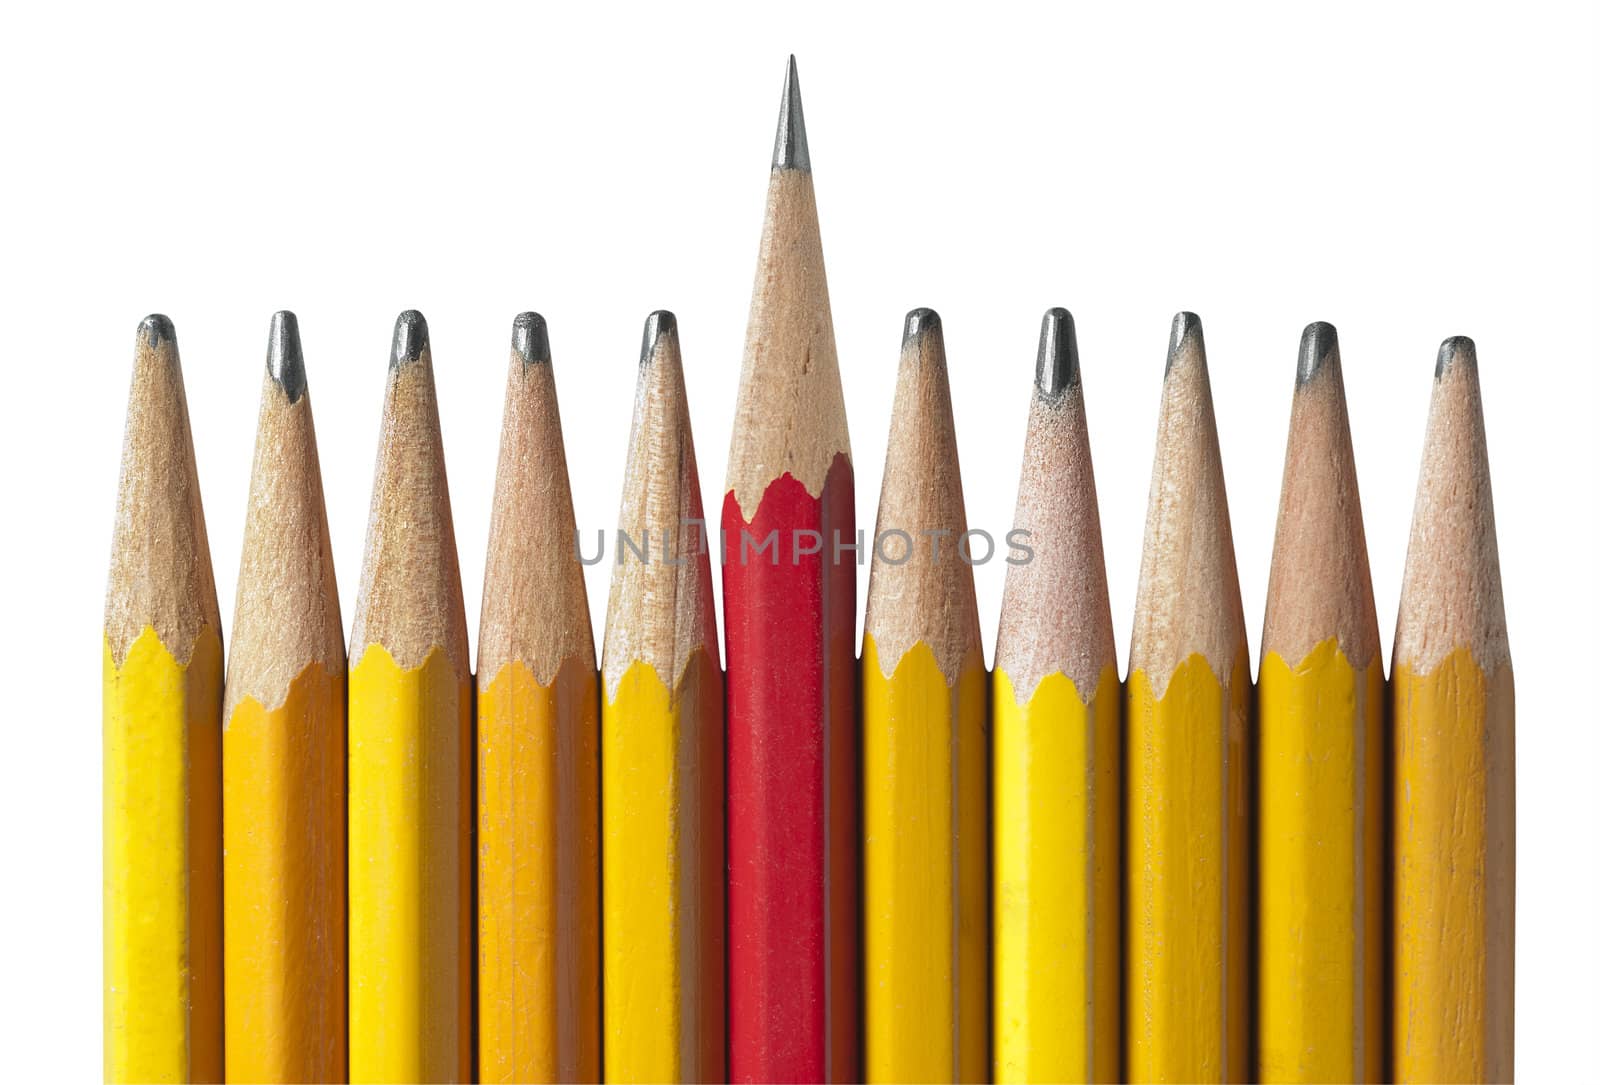 Sharpest pencil in bunch by f/2sumicron